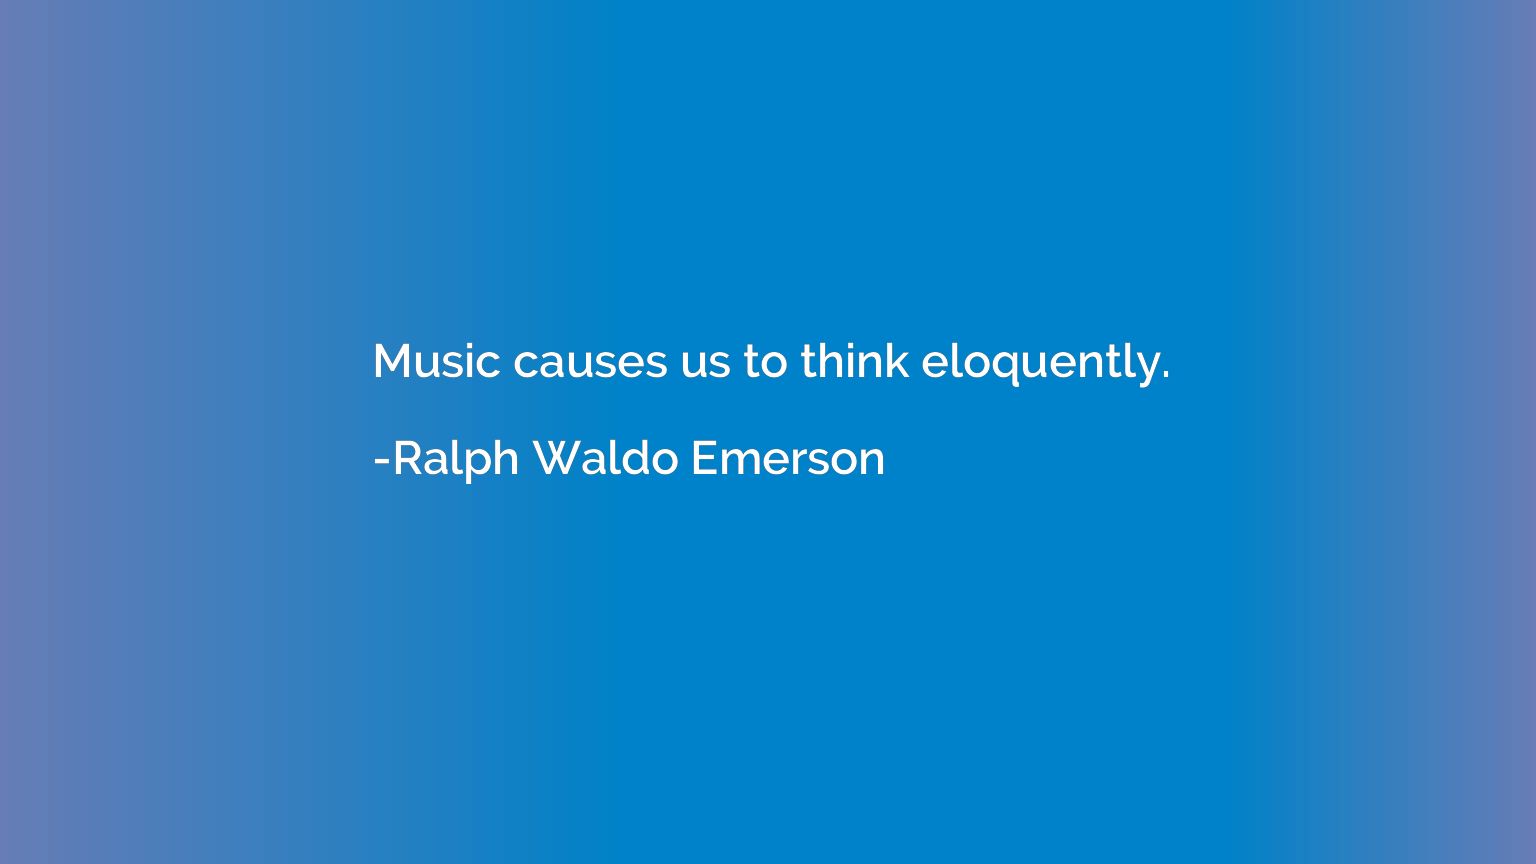 Music causes us to think eloquently.